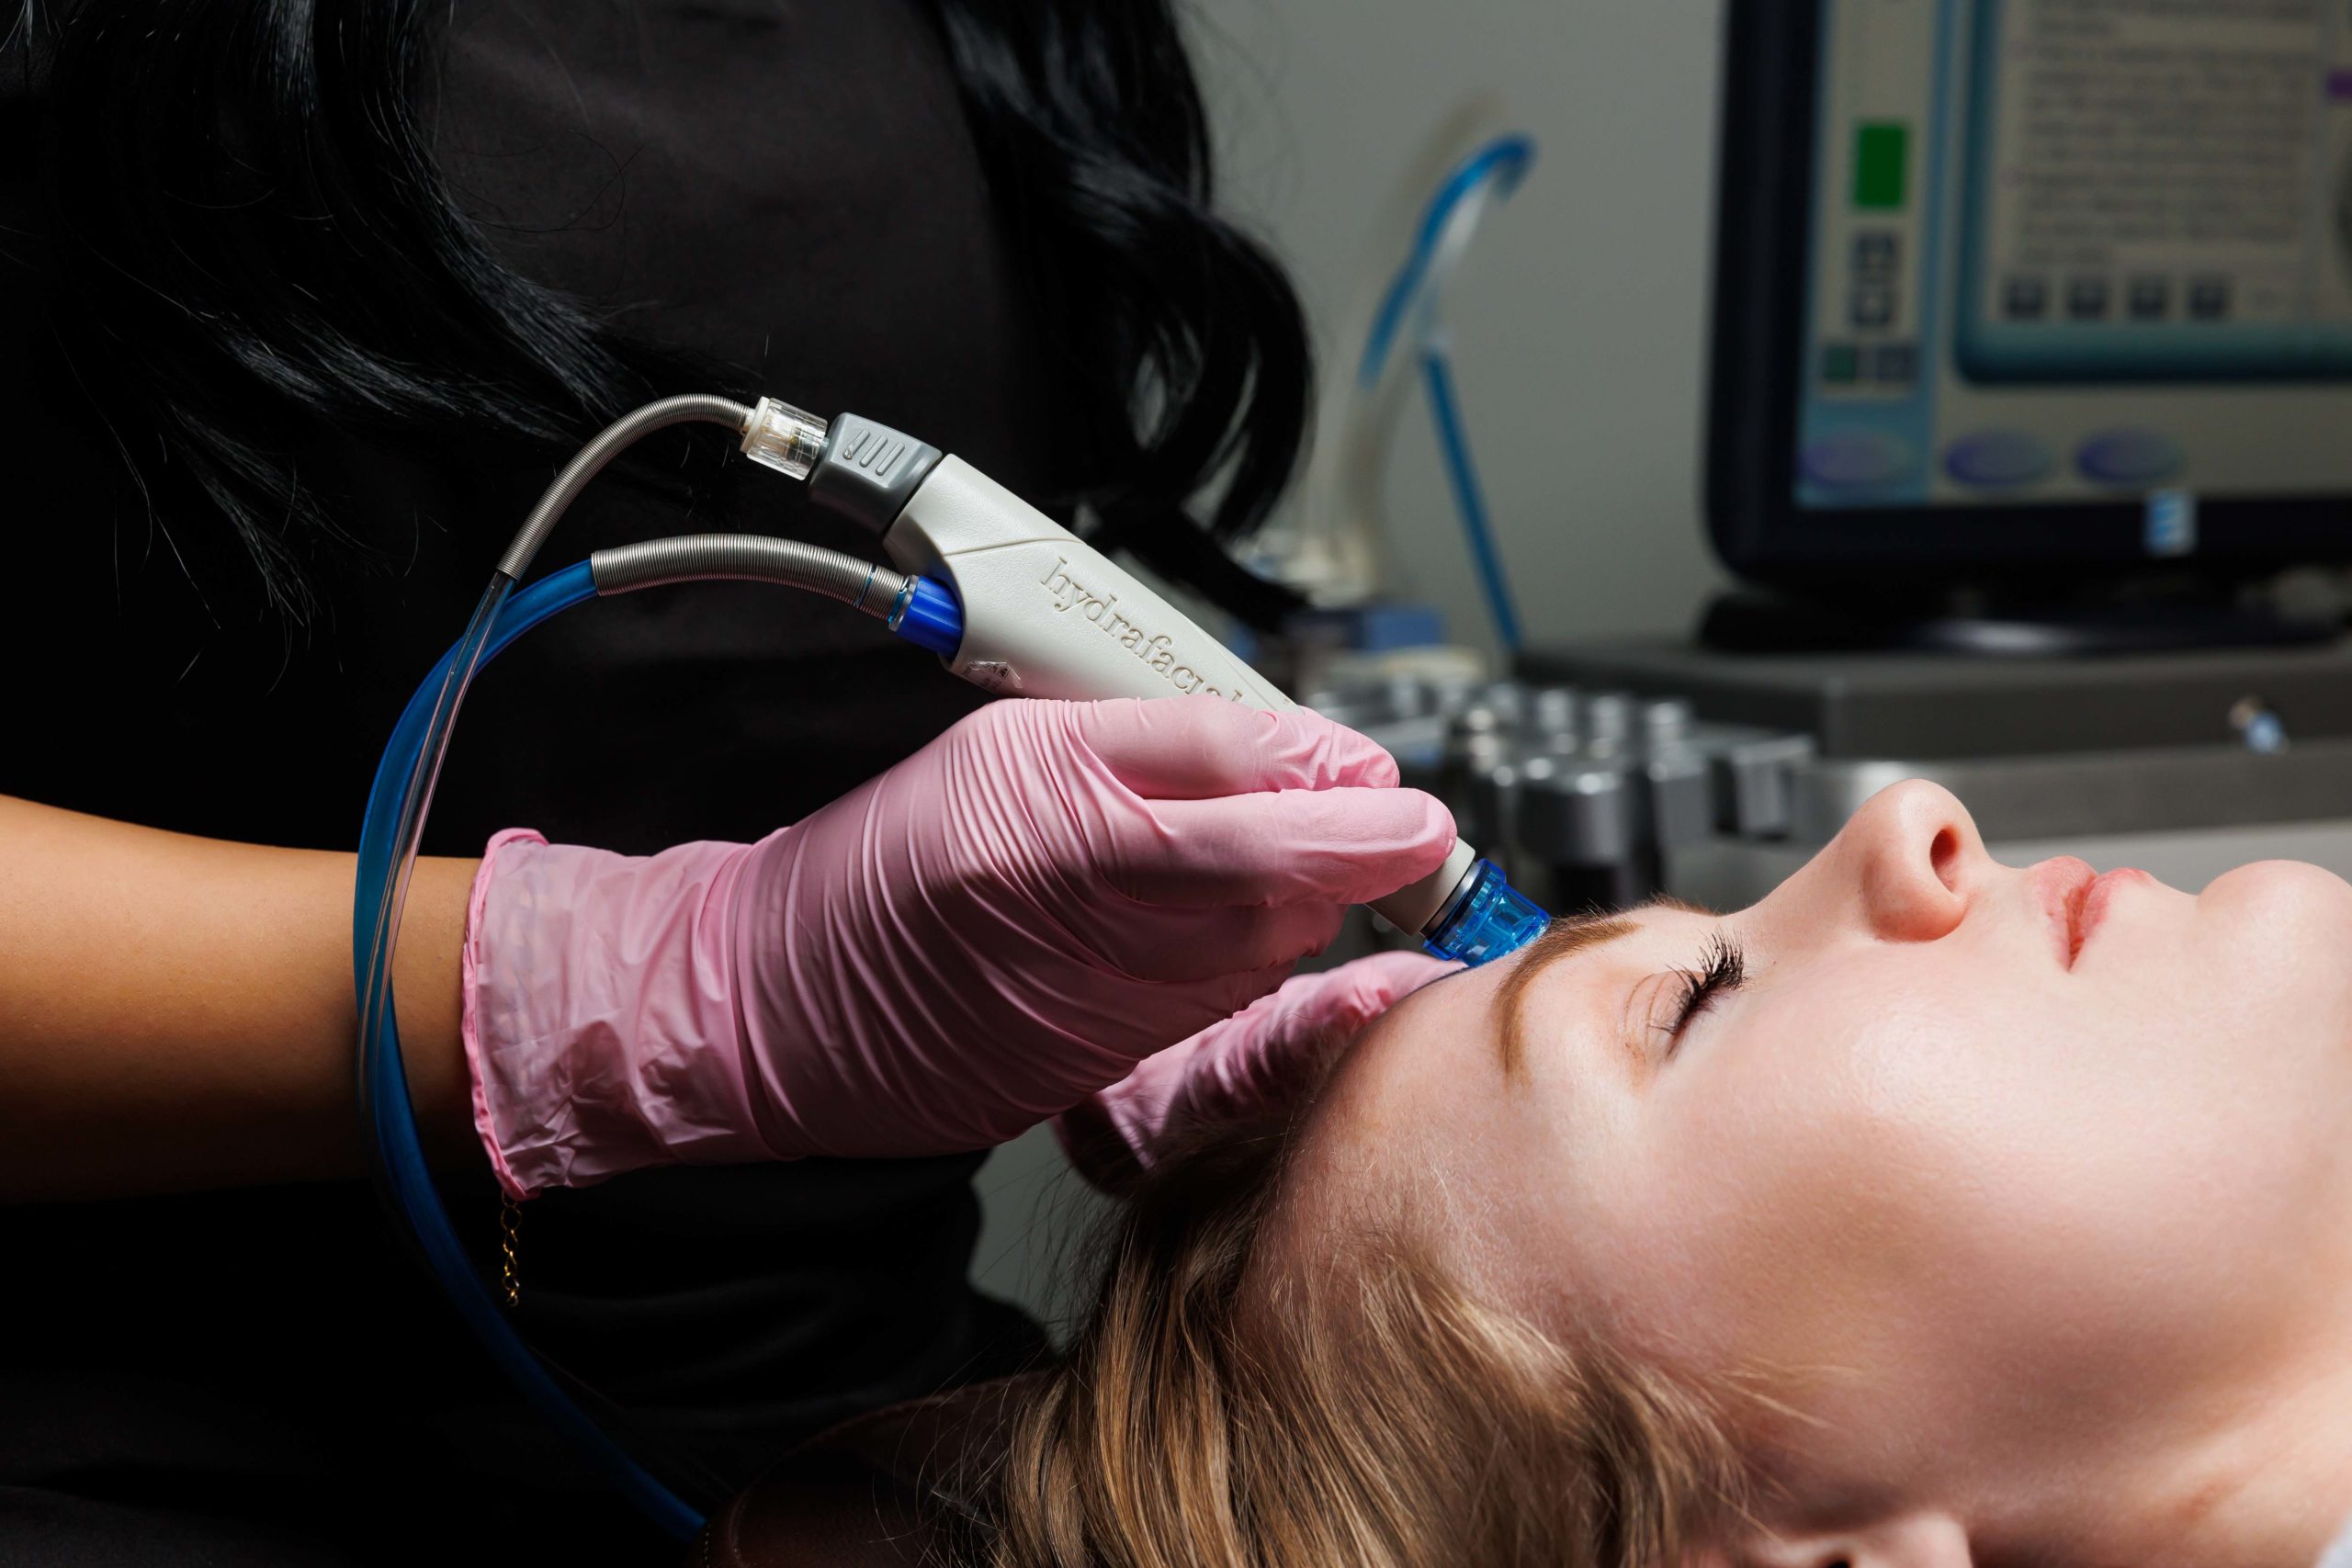 Cosmetologist holding device and woman's face in hand Getting Hydrafacial Treatment | APEX Performance & Aesthetics in Sandy, UT